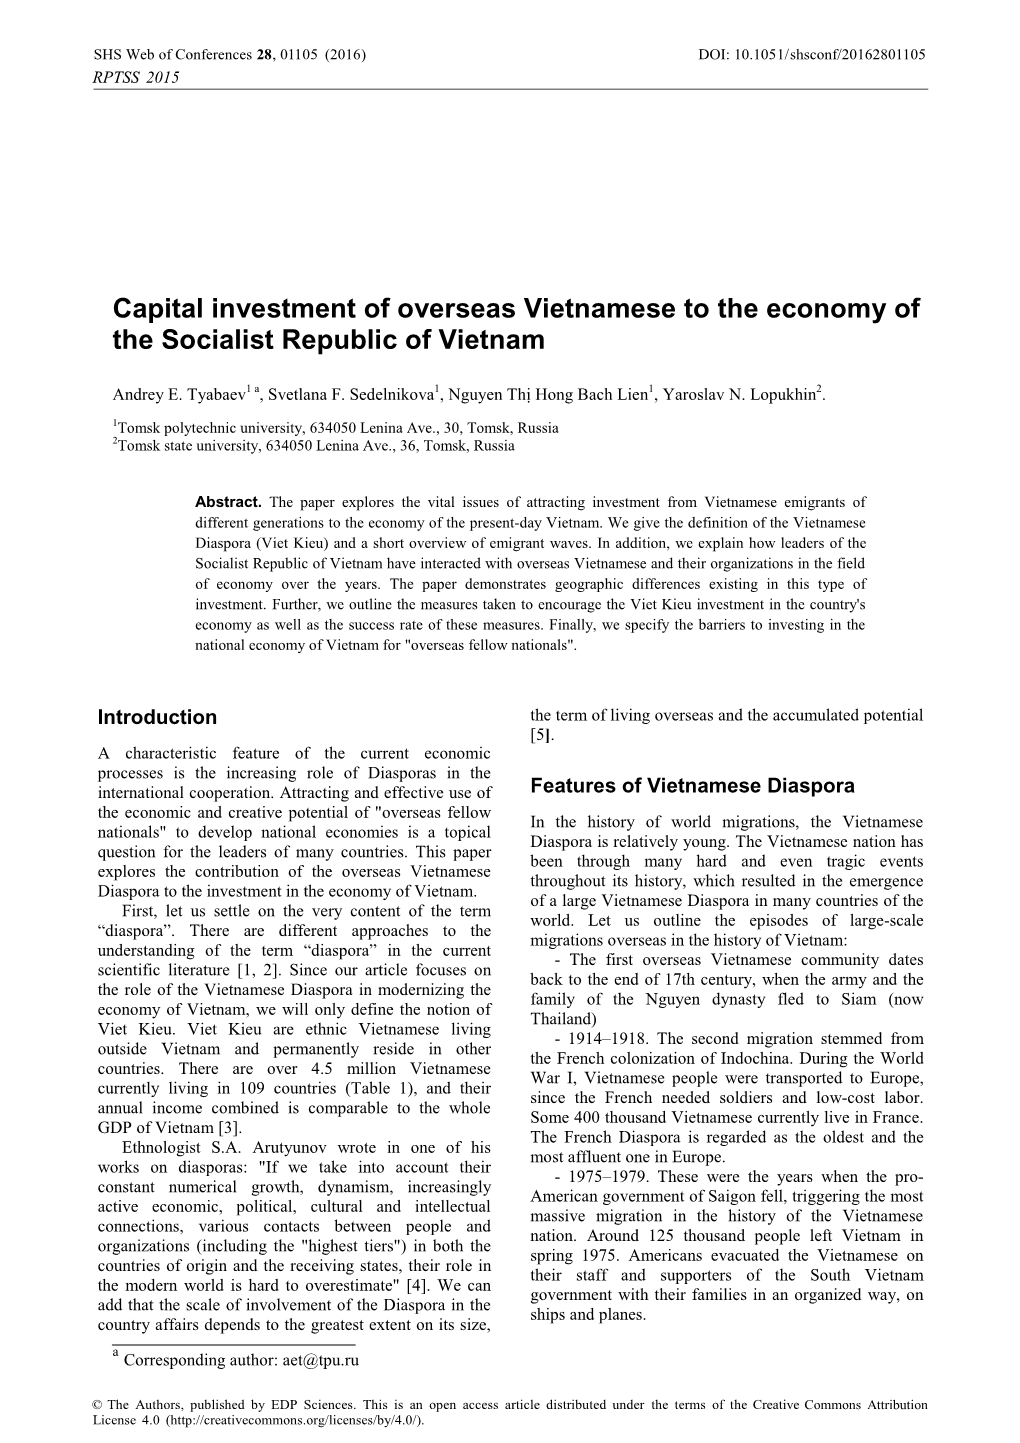 Capital Investment of Overseas Vietnamese to the Economy of the Socialist Republic of Vietnam